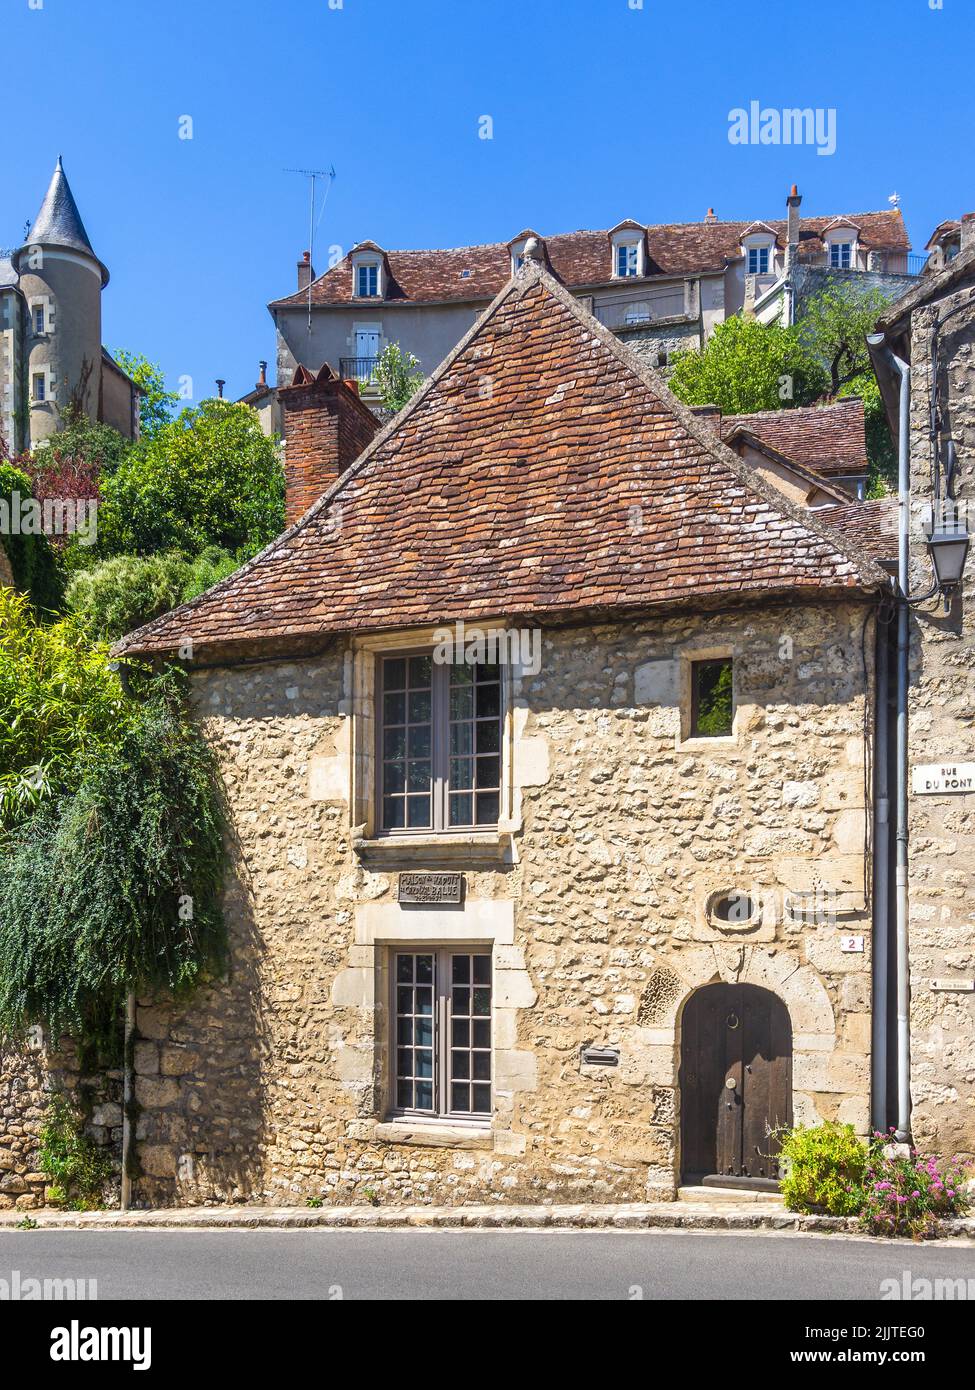 House in Angles-sur-l'Anglin, Vienne, of Cardinal Jean Balue, 1421-1491 Cardinal and Minister to King Louis XI of France. Stock Photo